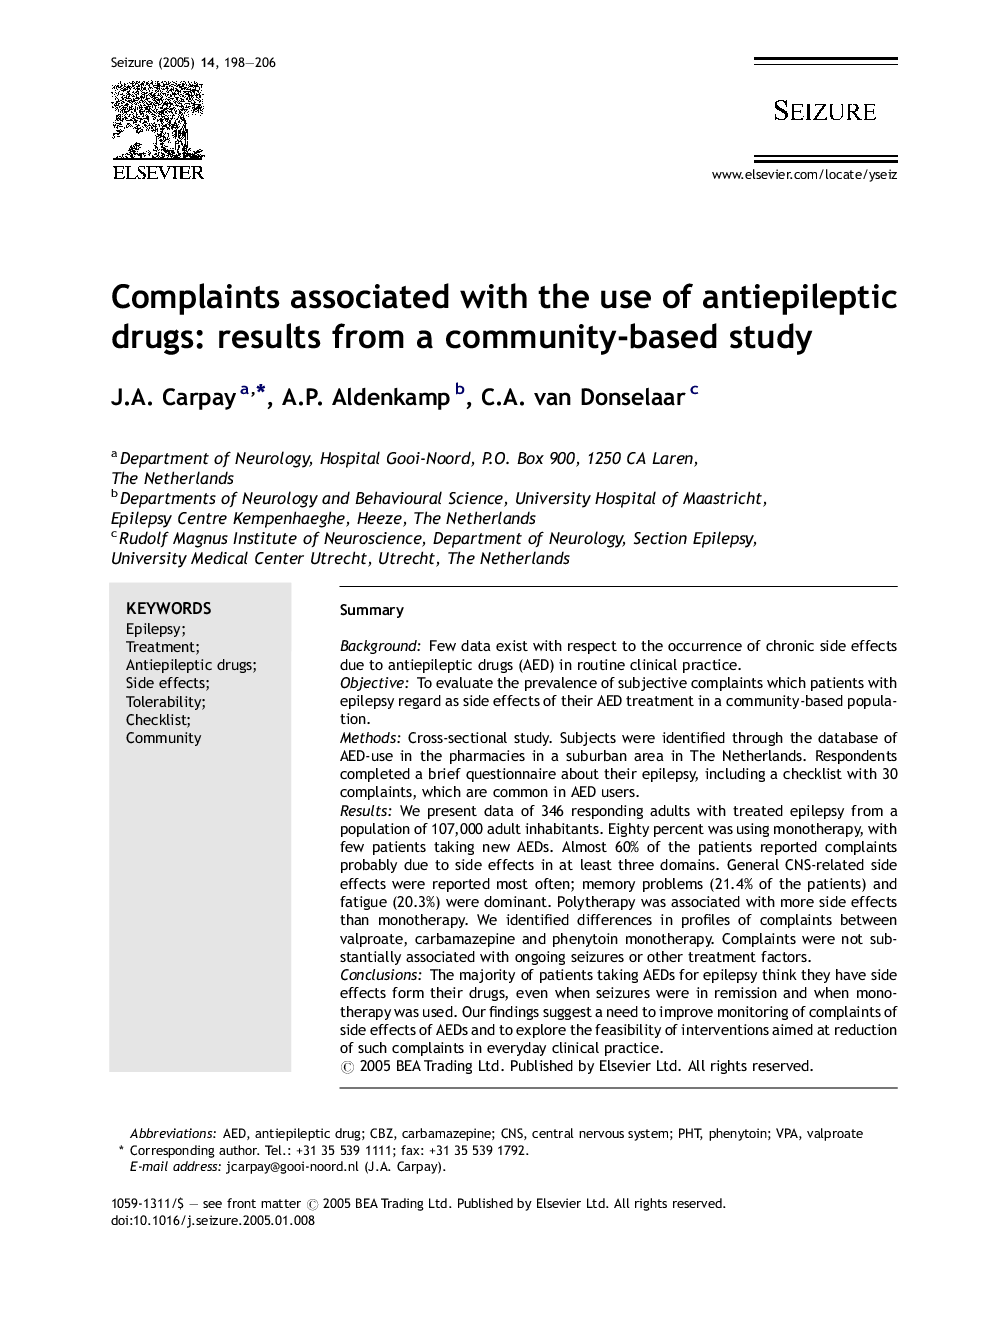 Complaints associated with the use of antiepileptic drugs: results from a community-based study